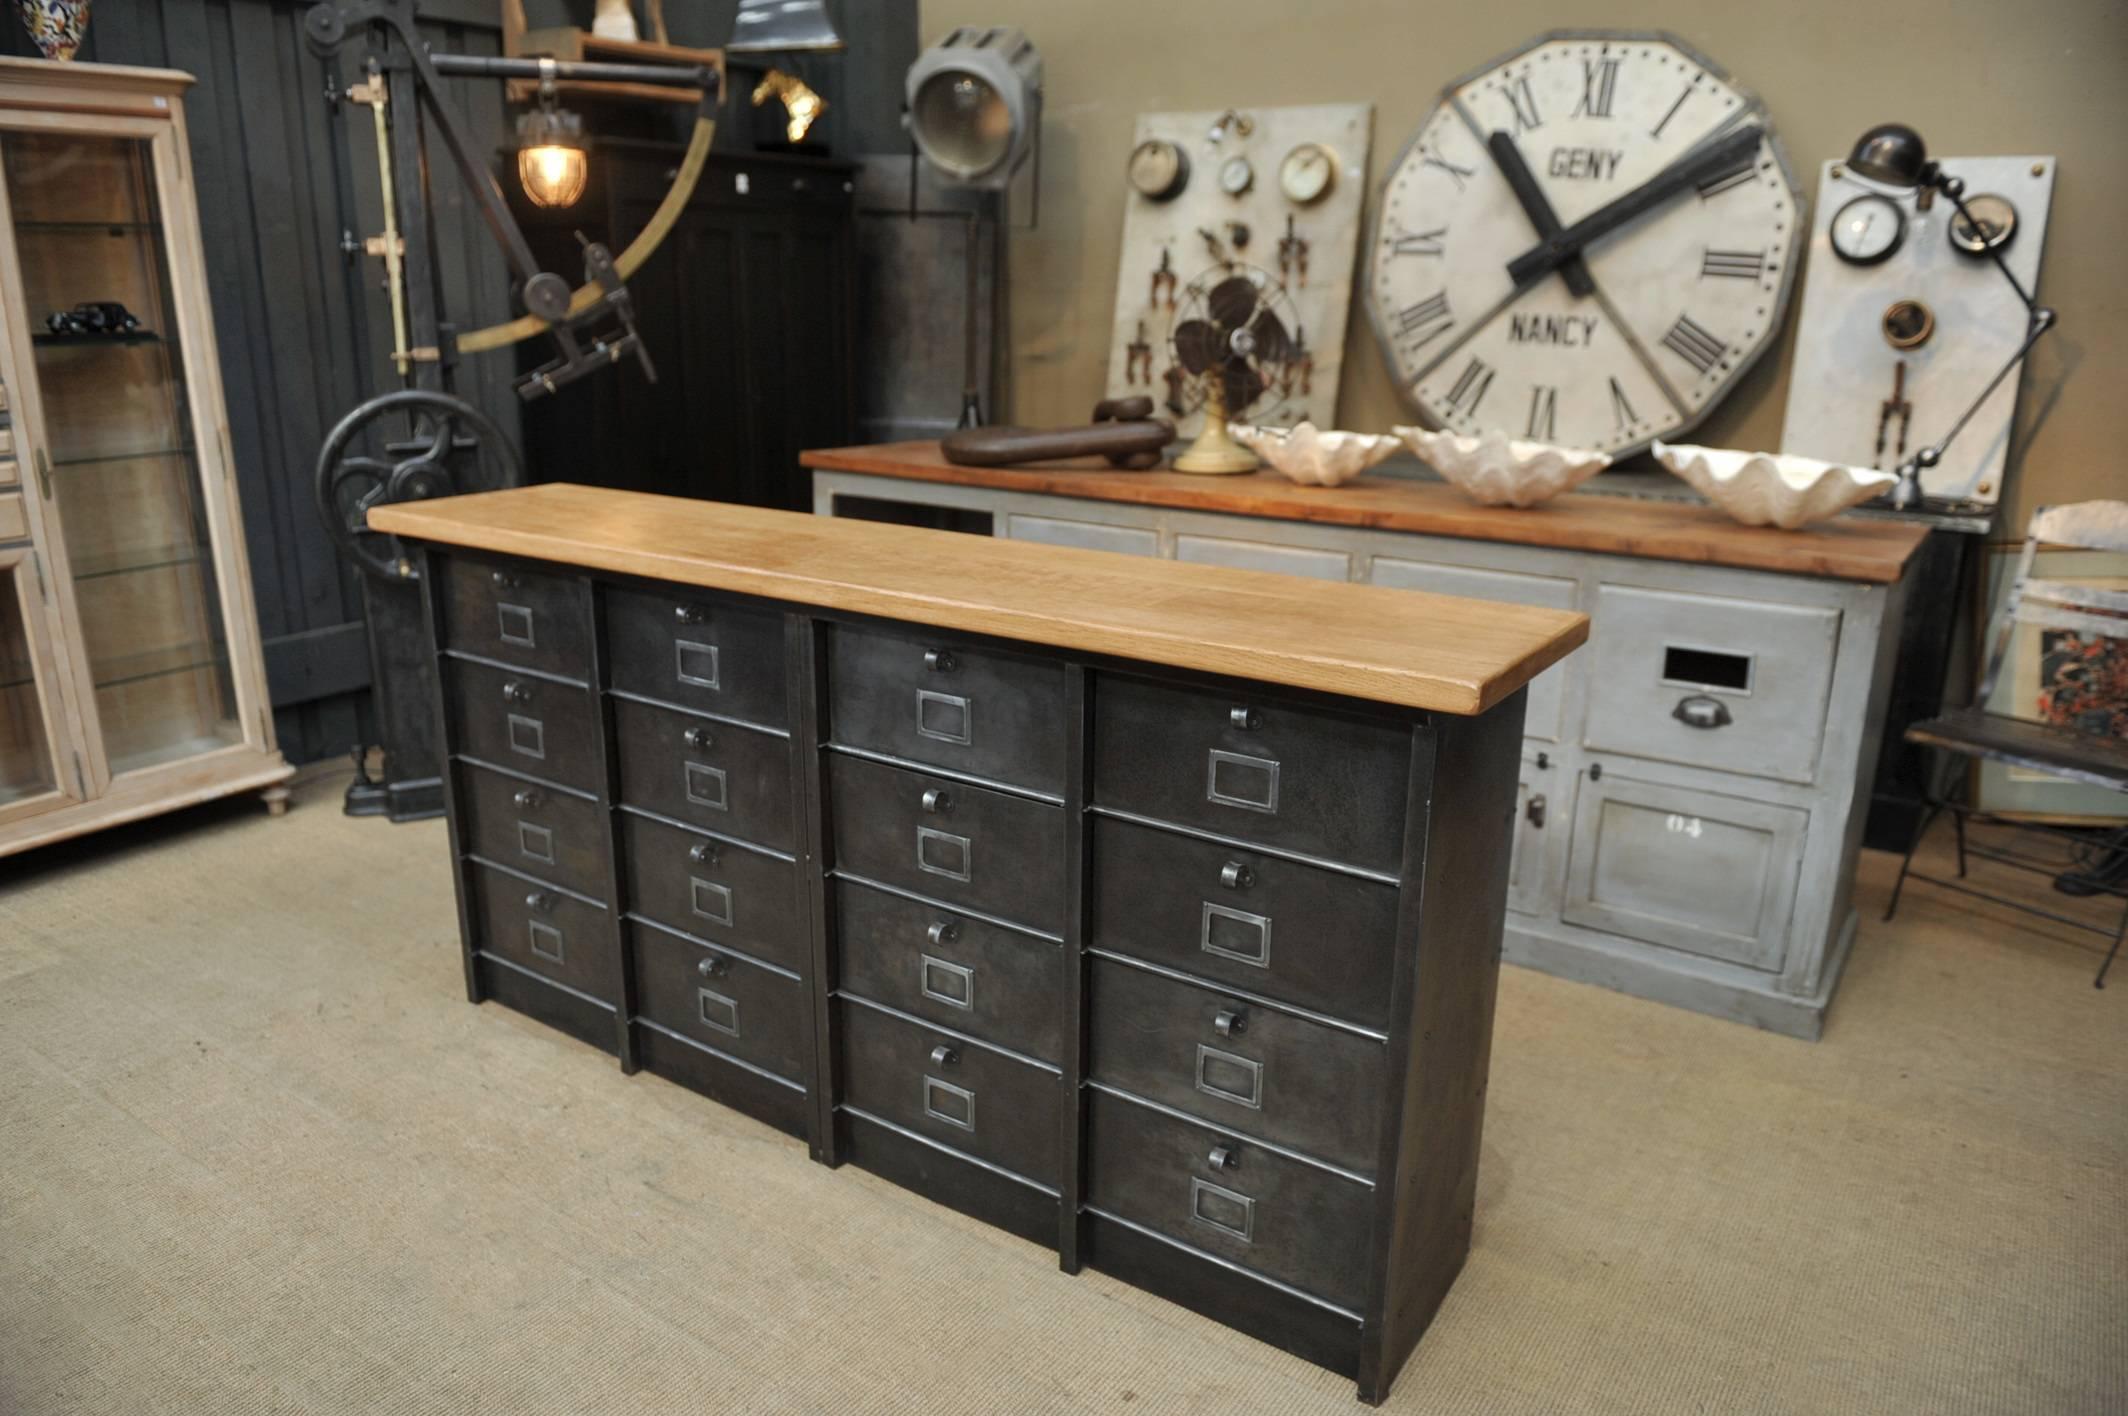 Ronéo 16 iron clapet cabinet, circa 1950 with original tag holder and recent solid oak top.